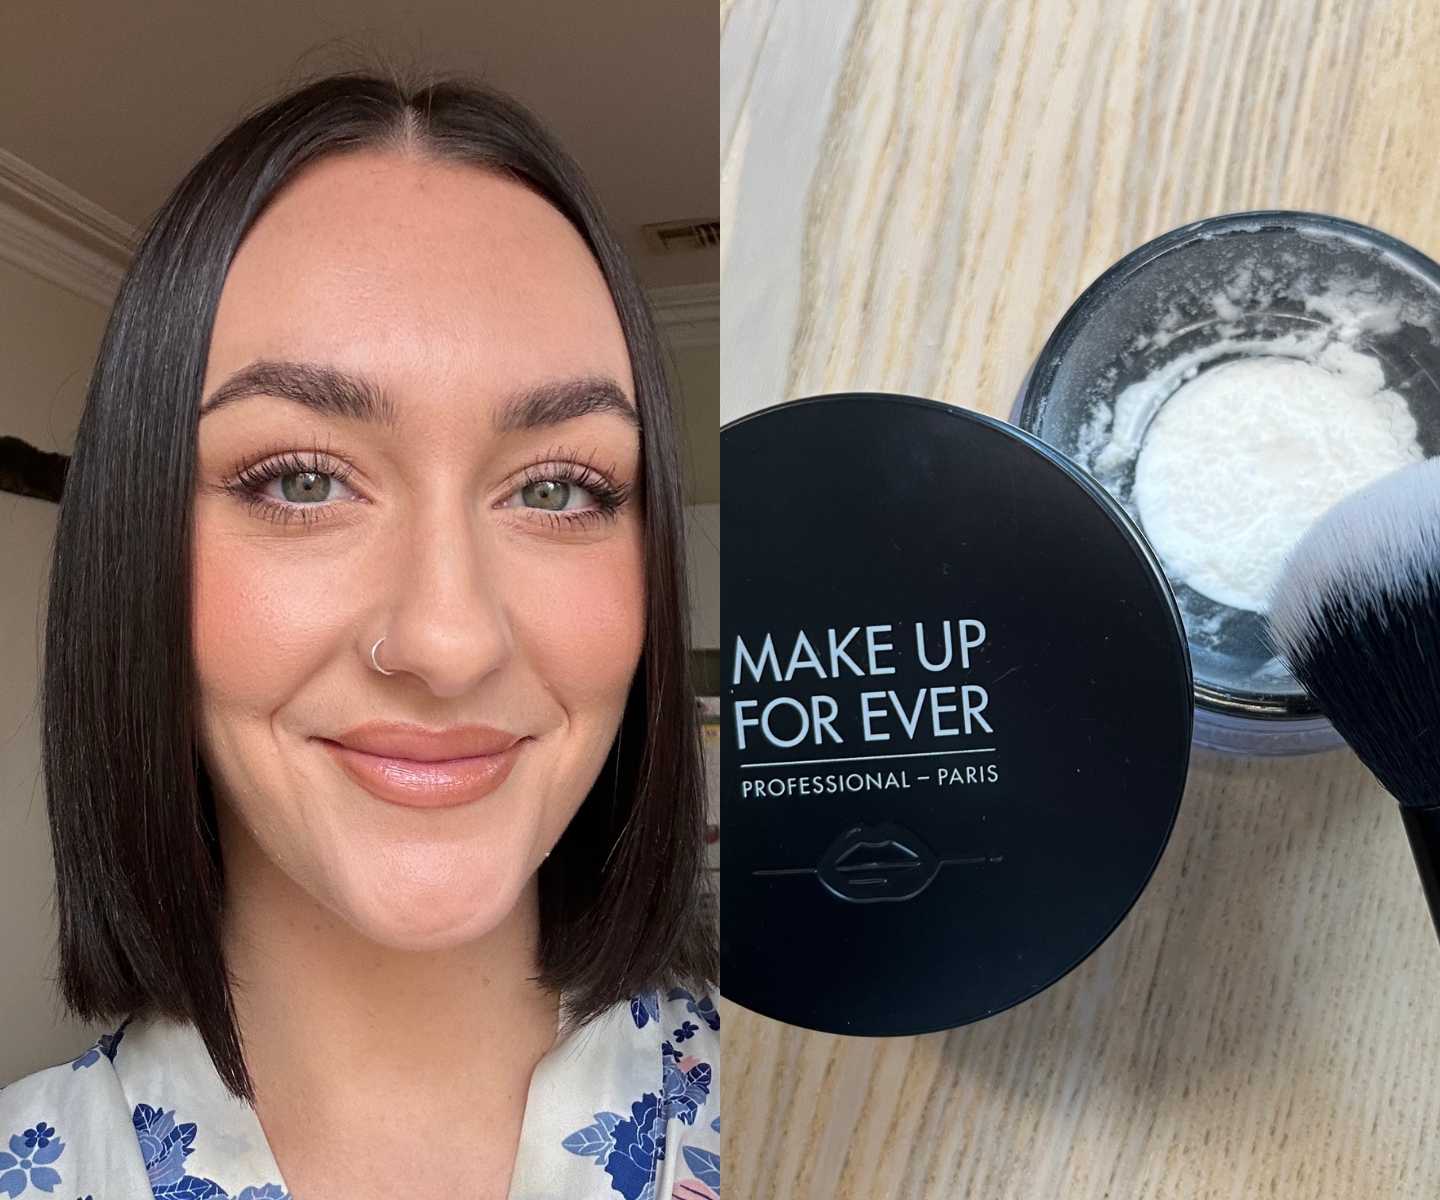 HOW TO: Bake your Makeup with ULTRA HD SETTING POWDER